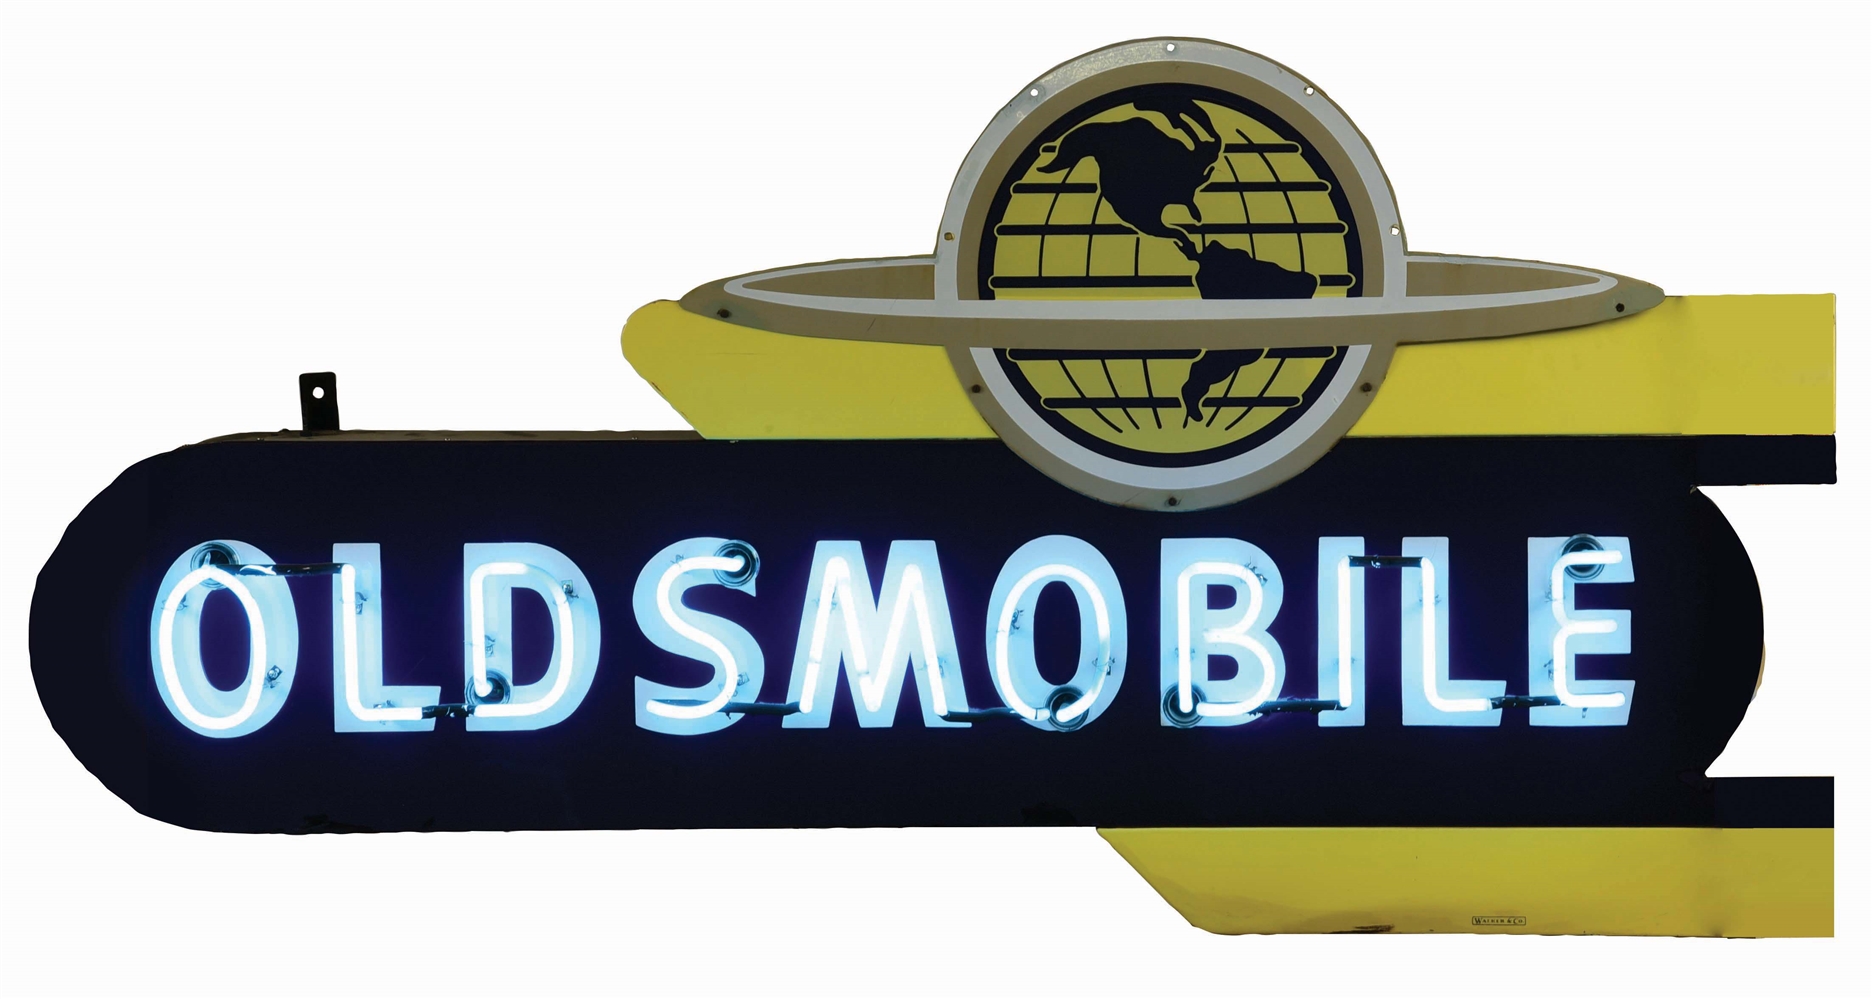 OLDSMOBILE MOTOR CARS FOUR PIECE PORCELAIN NEON SIGN W/ GLOBE GRAPHIC.